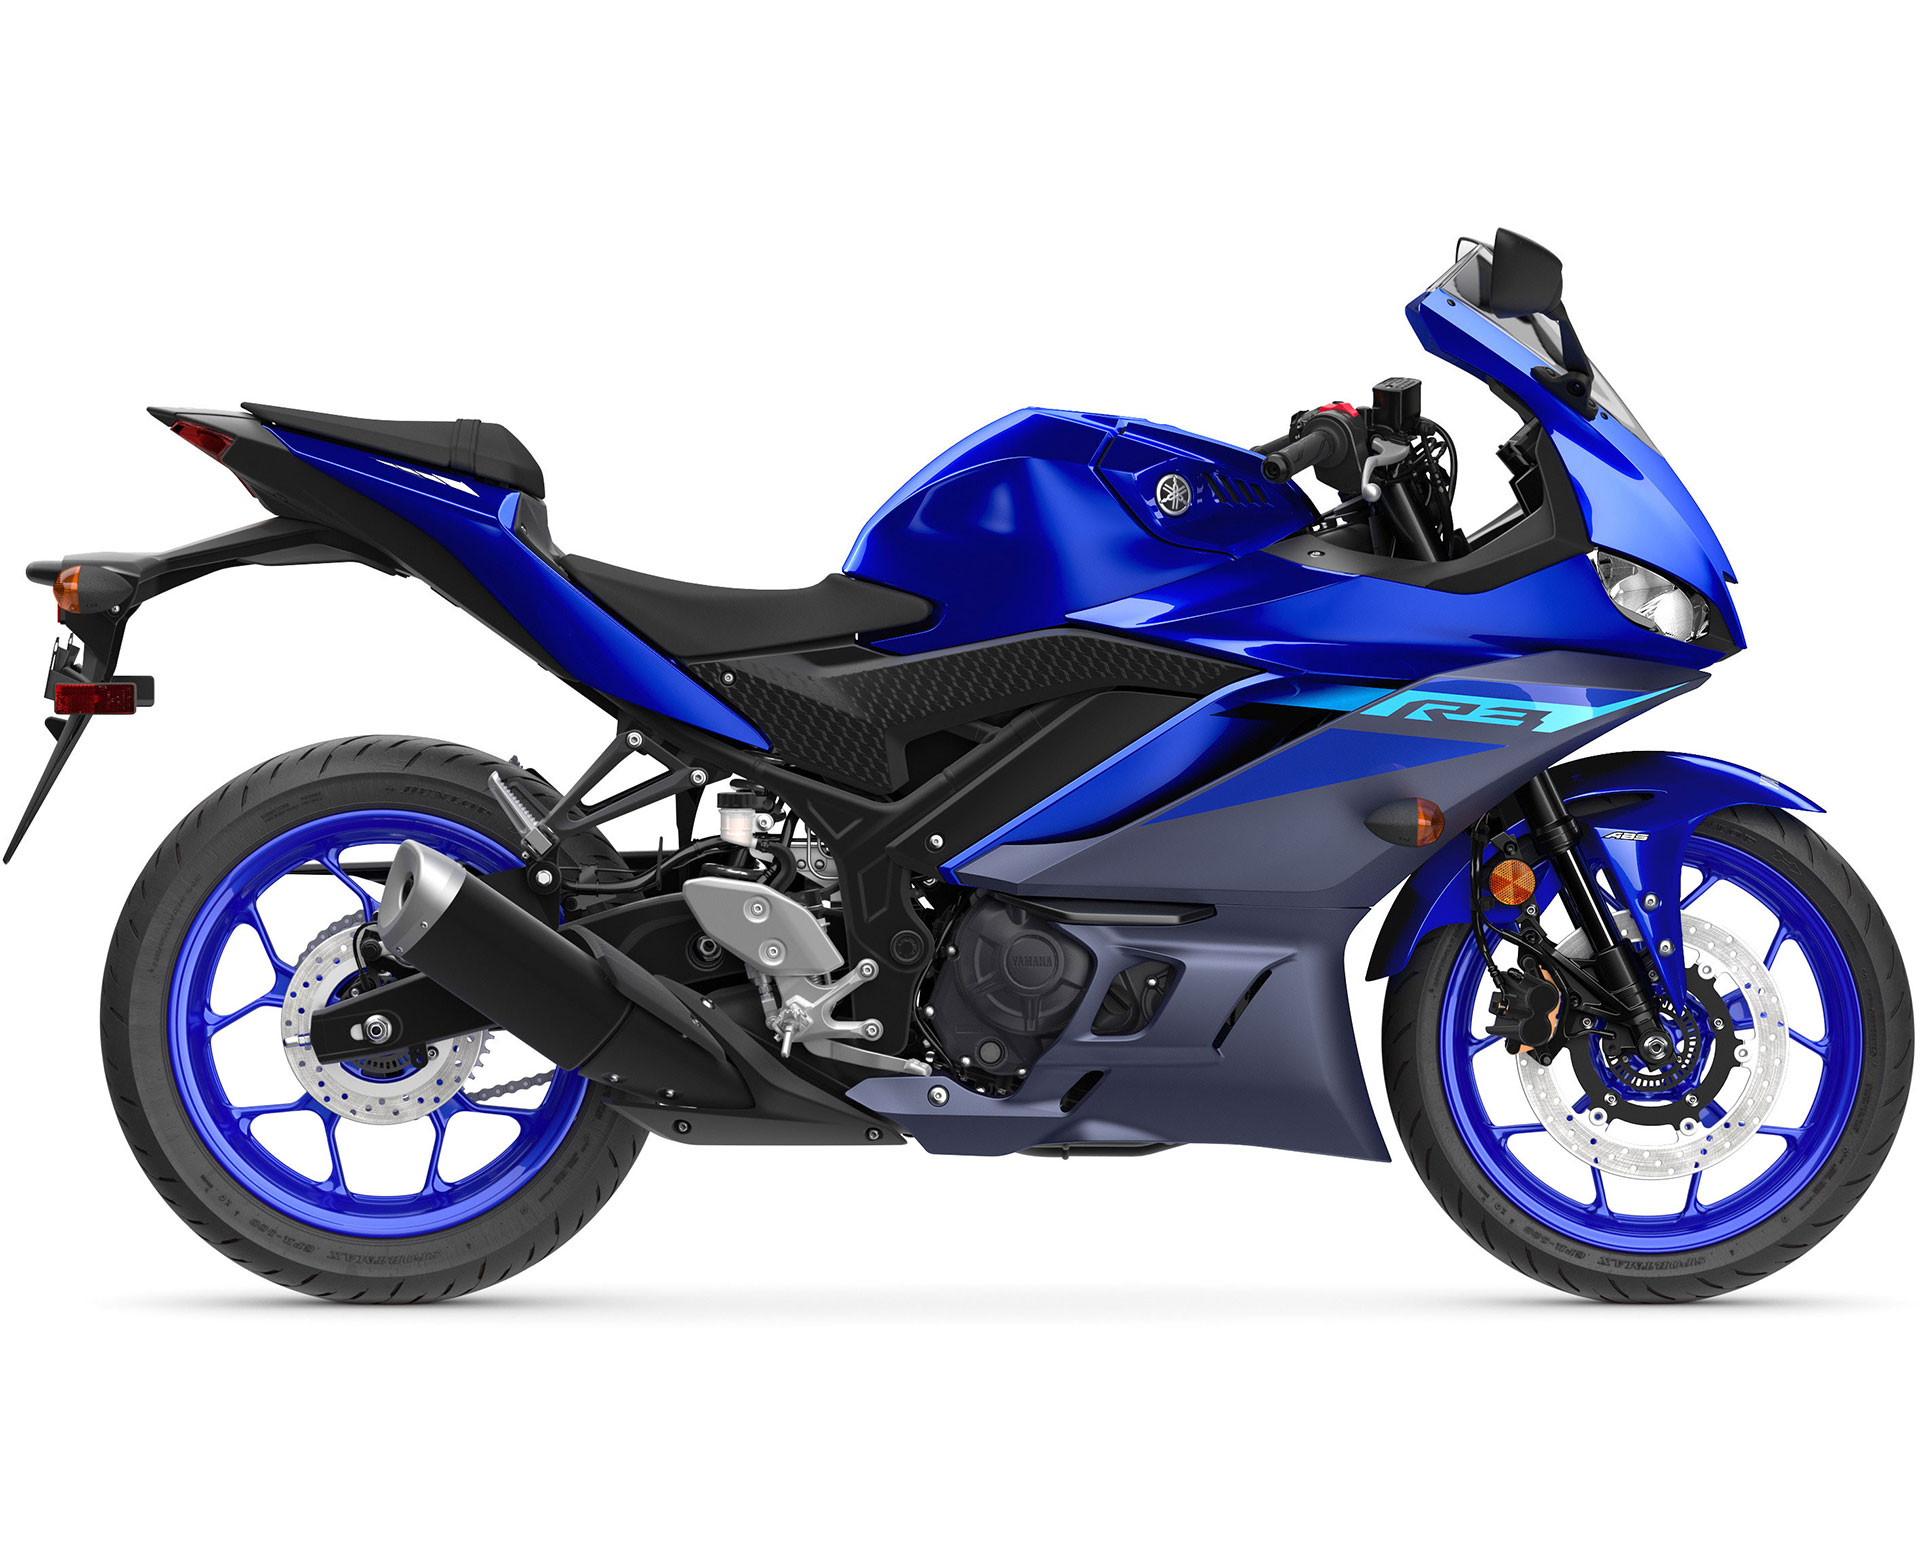 Thumbnail of your customized 2024 YZF-R3